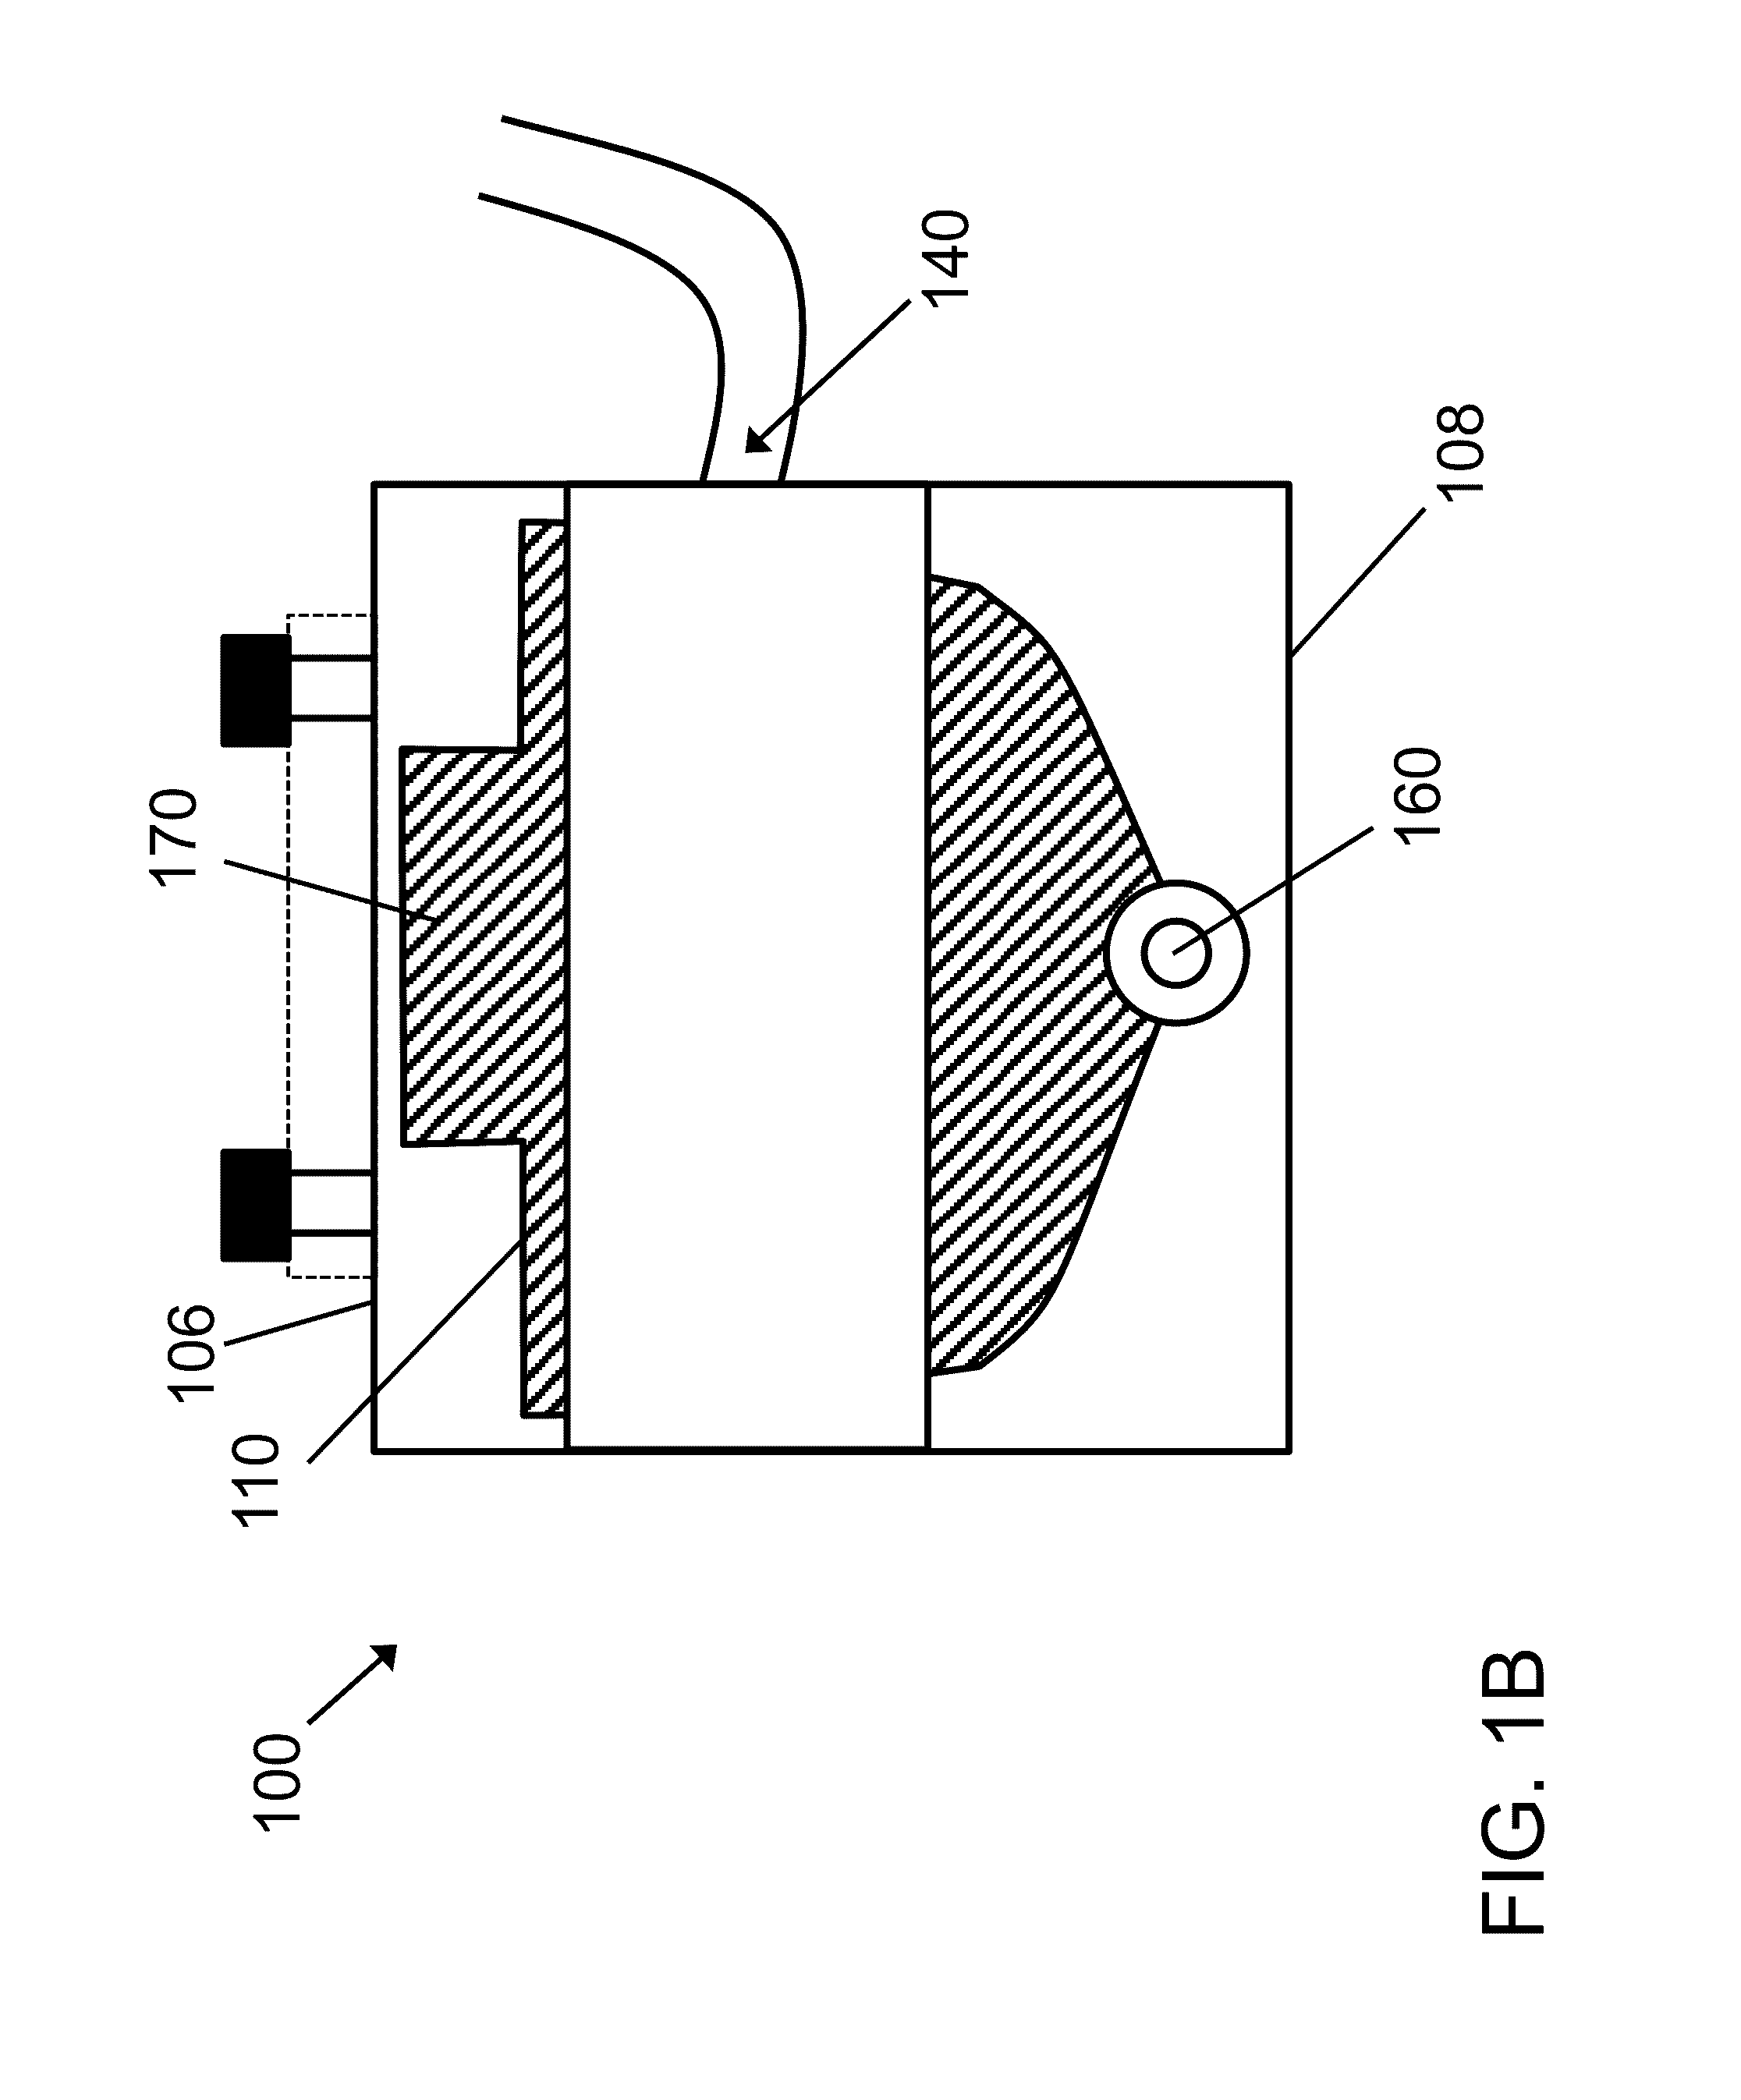 Acoustic blood separation processes and devices